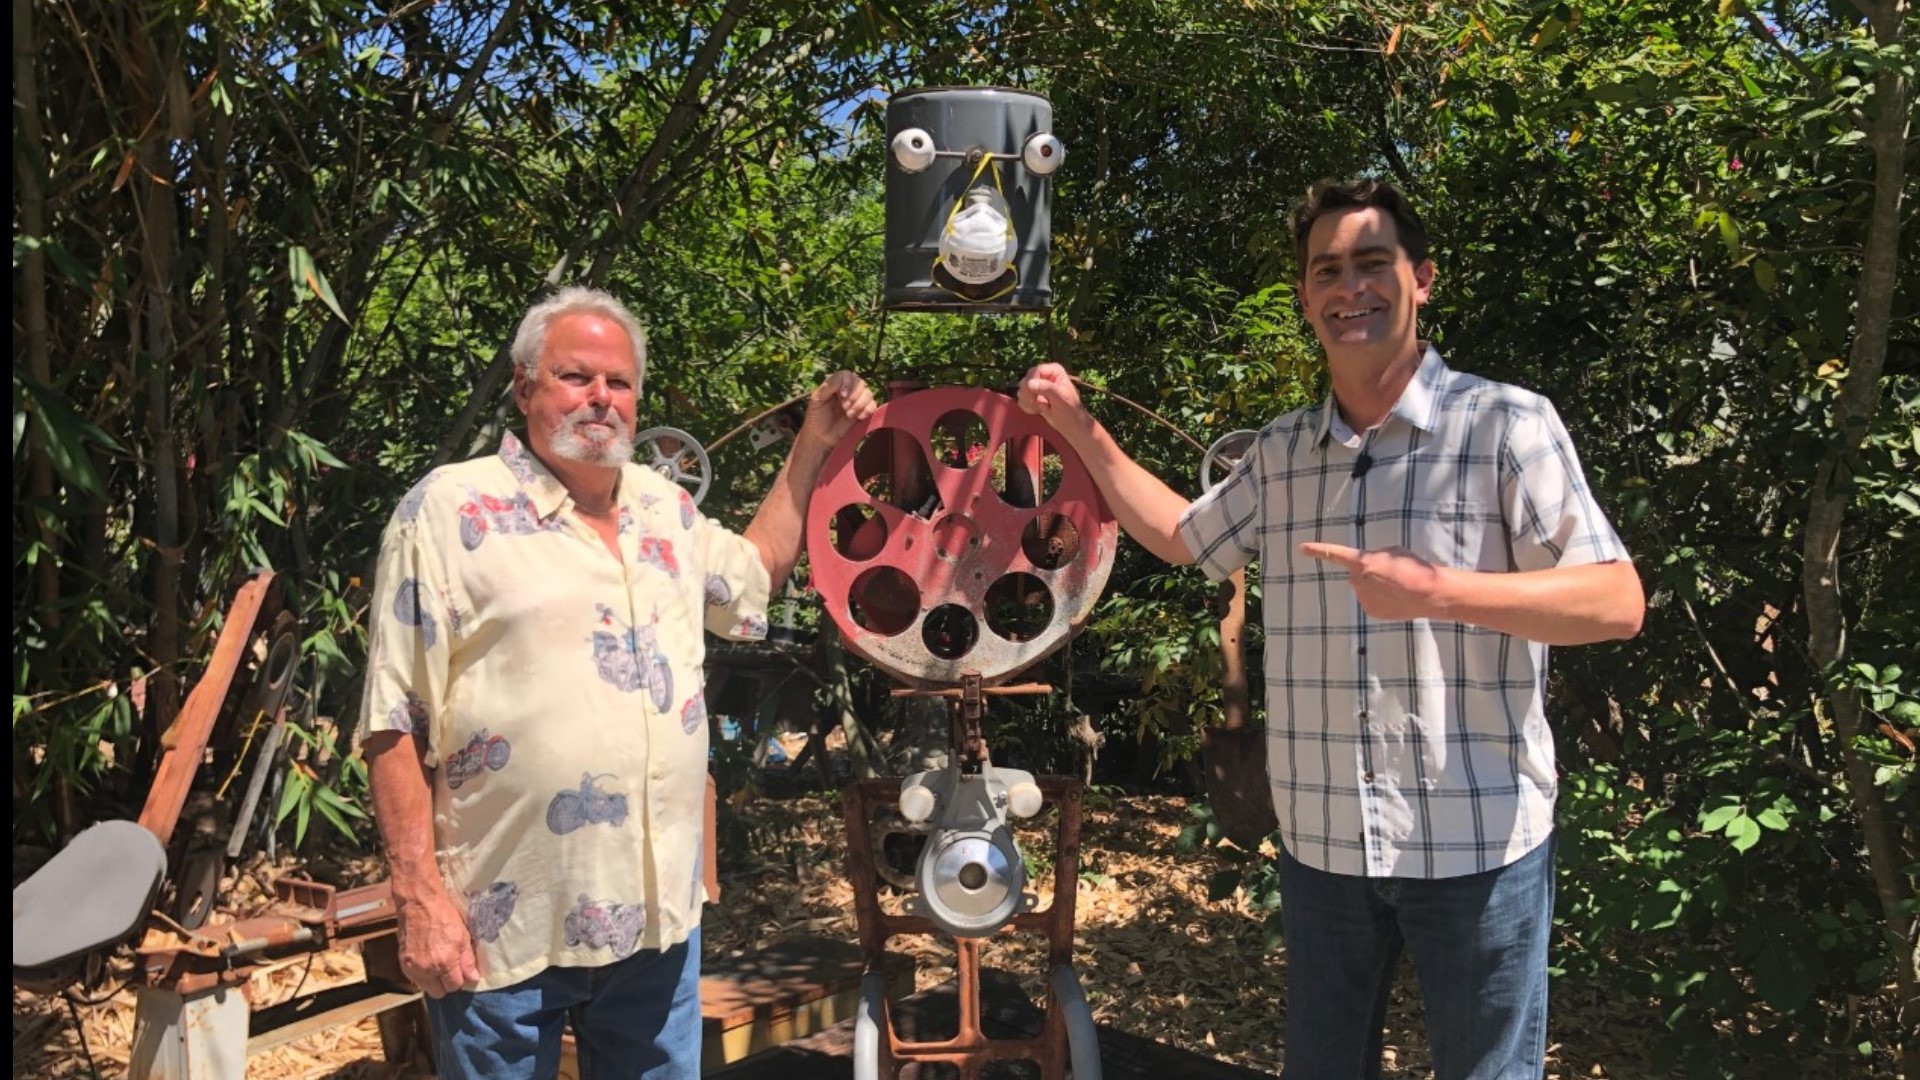 An artist built a COVID Robot using household scraps and some free time at home in Vista, CA.